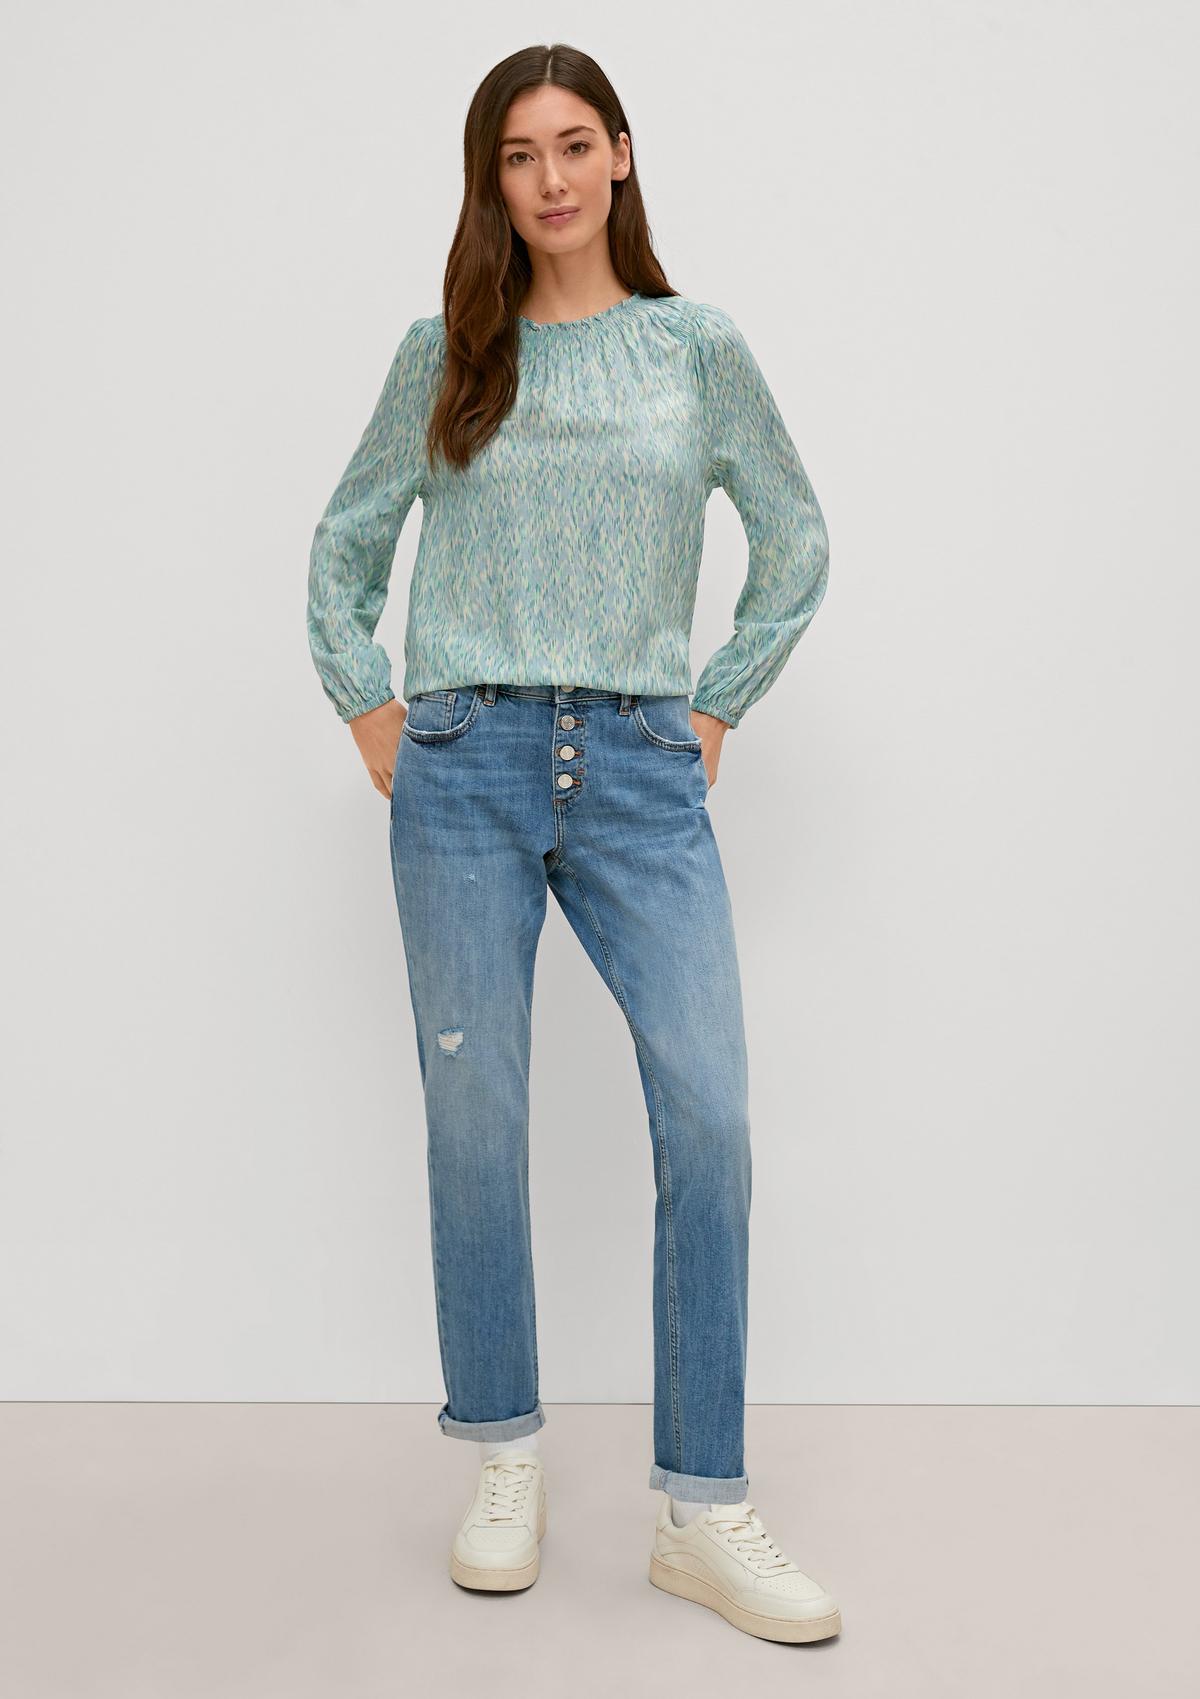 Relaxed fit: jeans with distressed effects